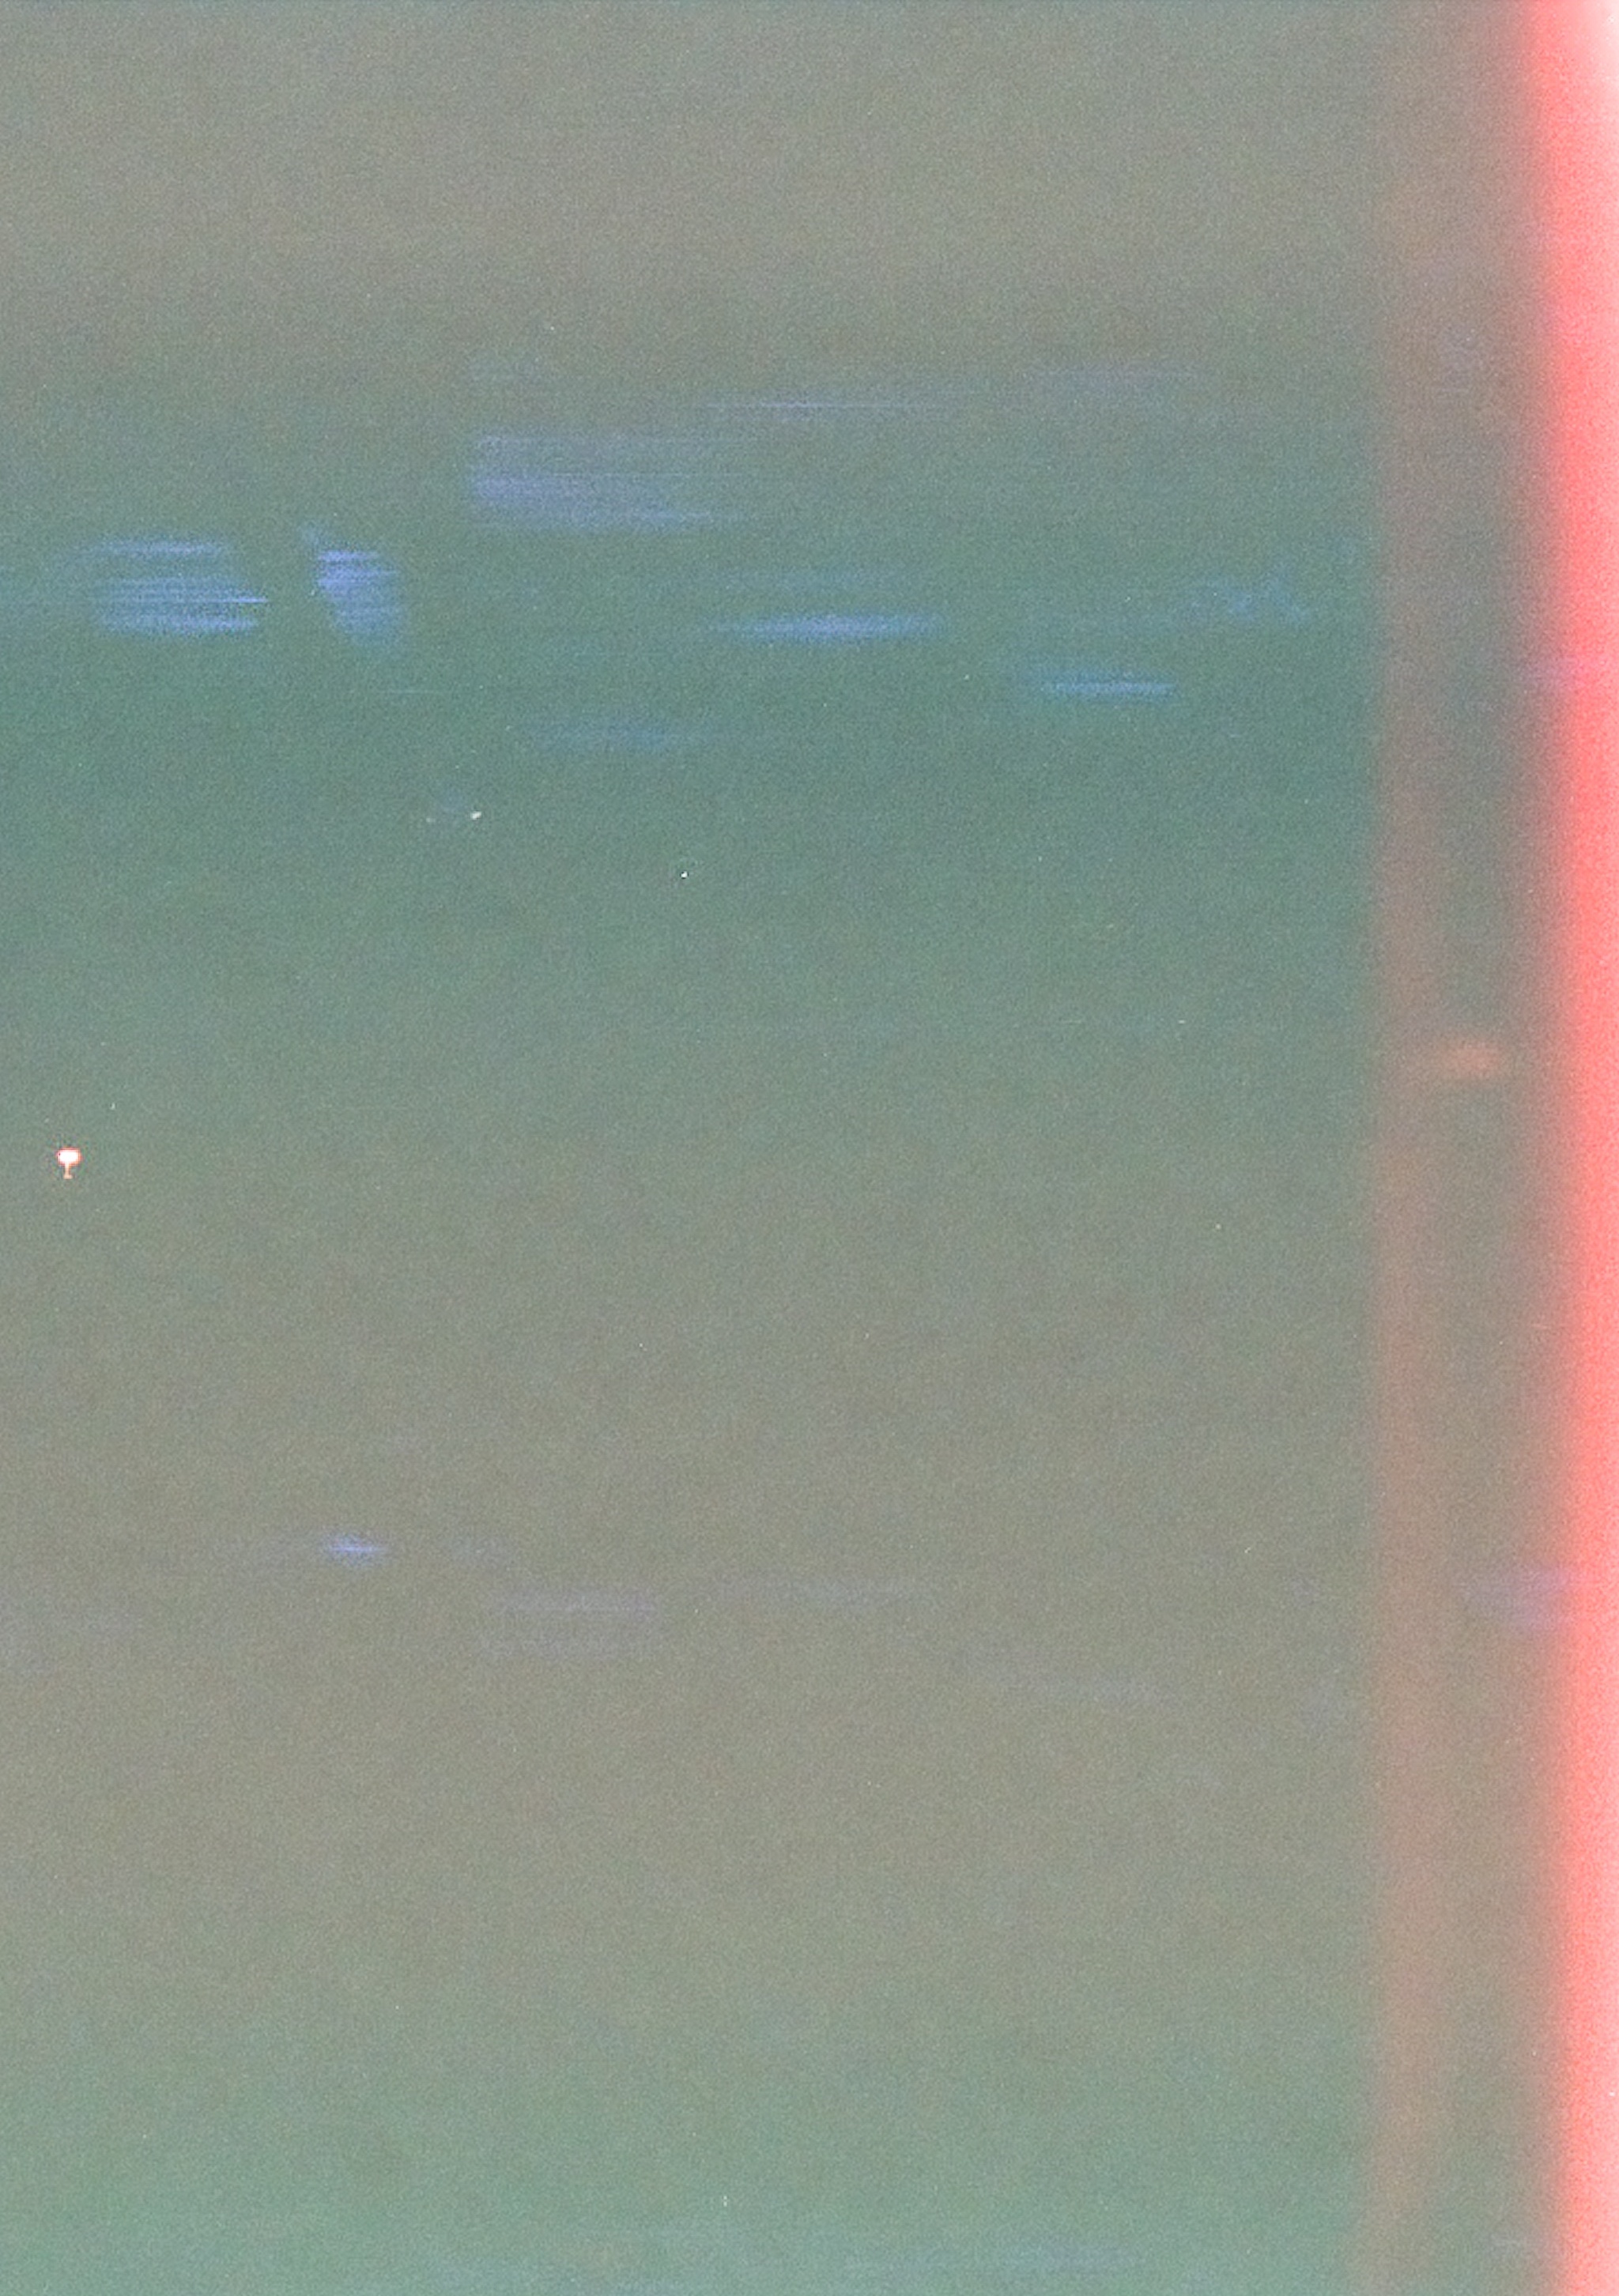 Fuzzy photo largely gray with red light bleeding on the right edge.